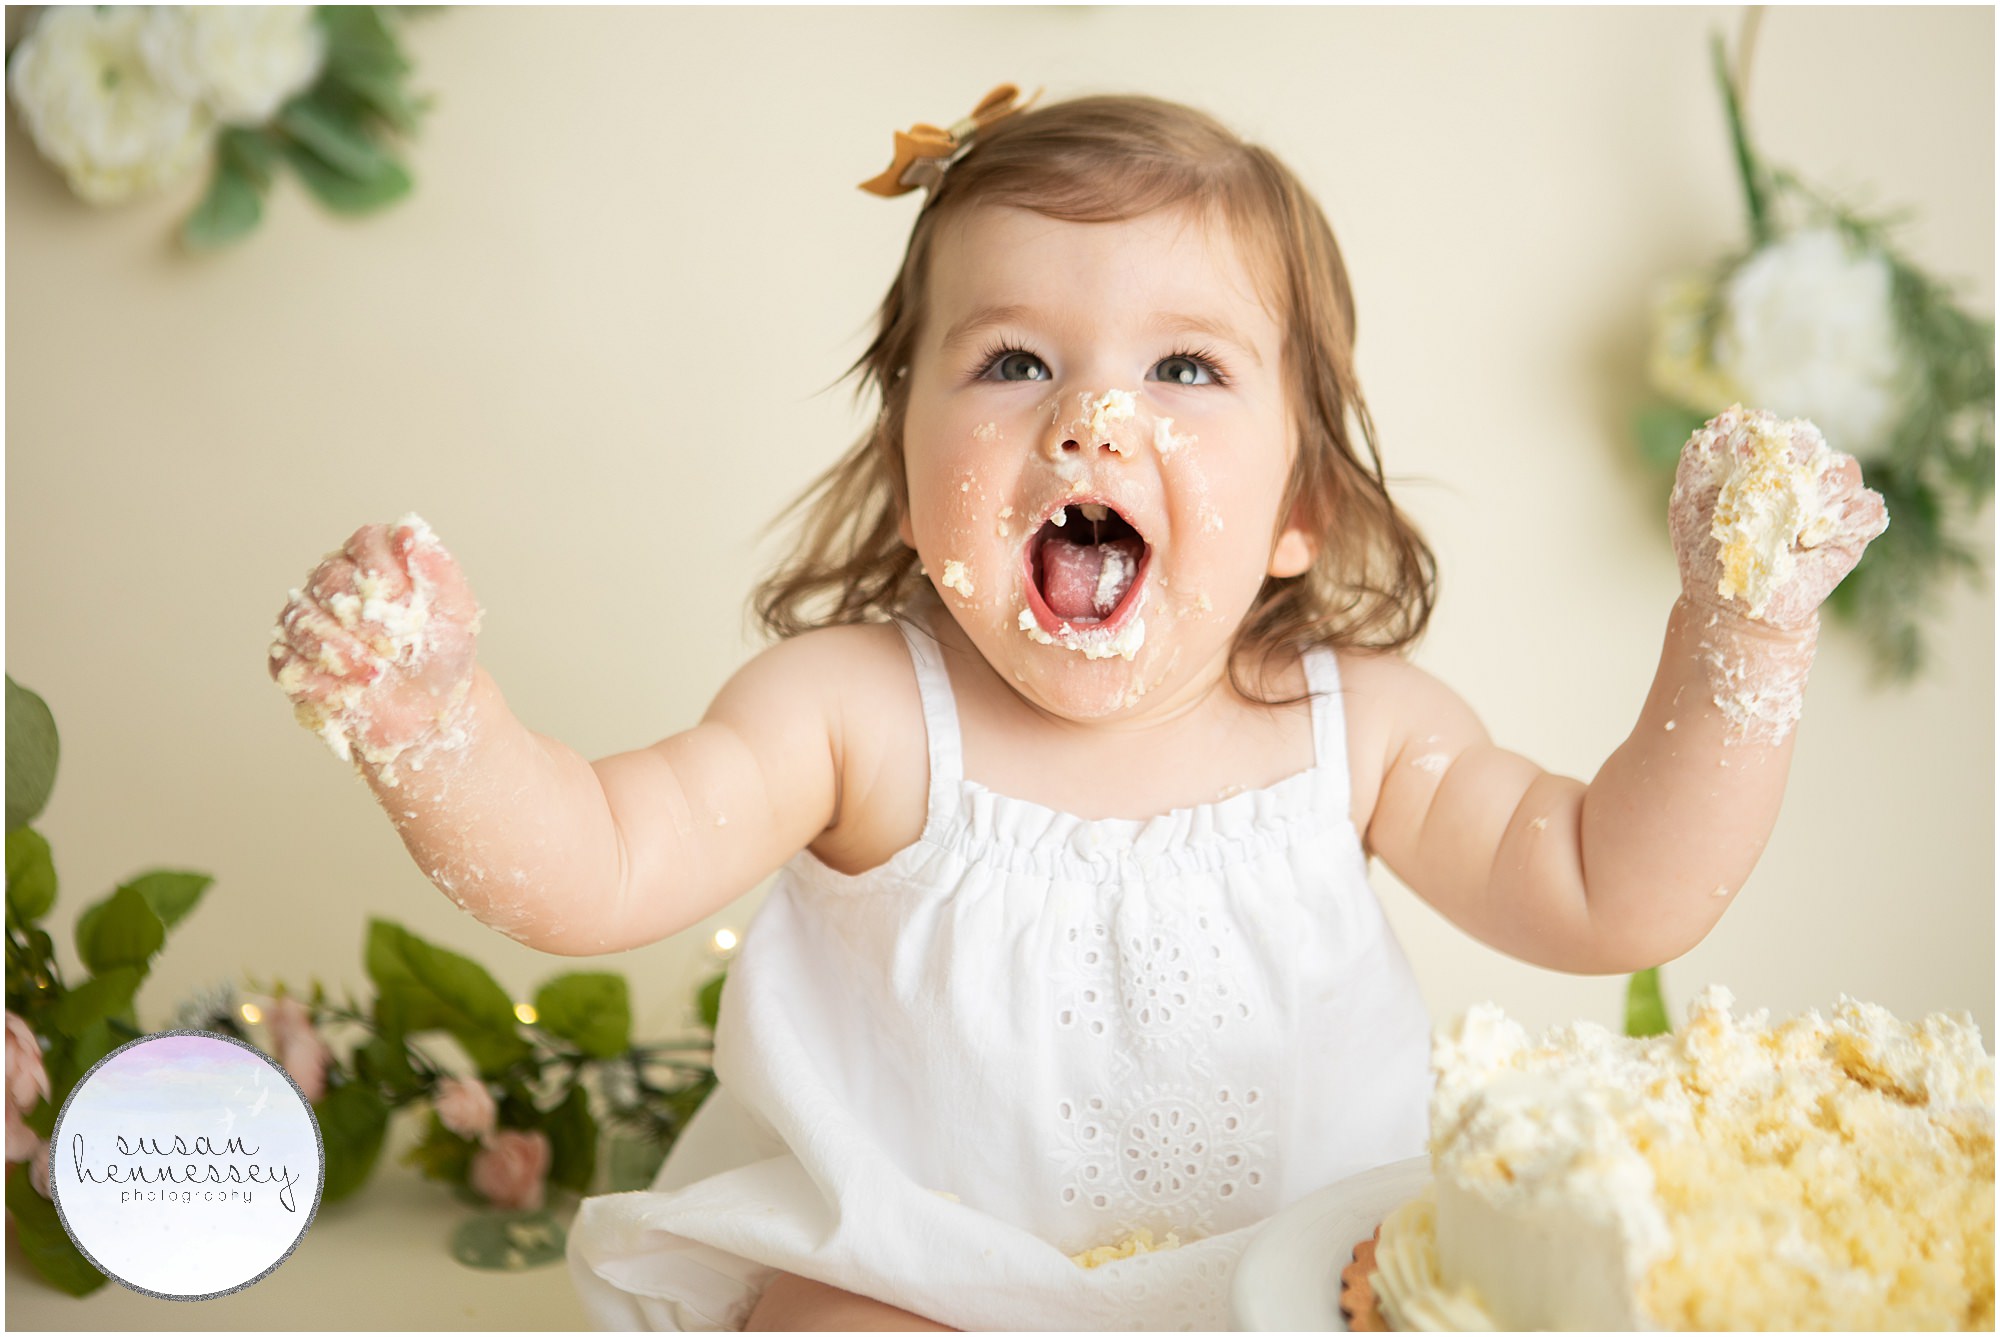 Cake smash session filled with greenery 